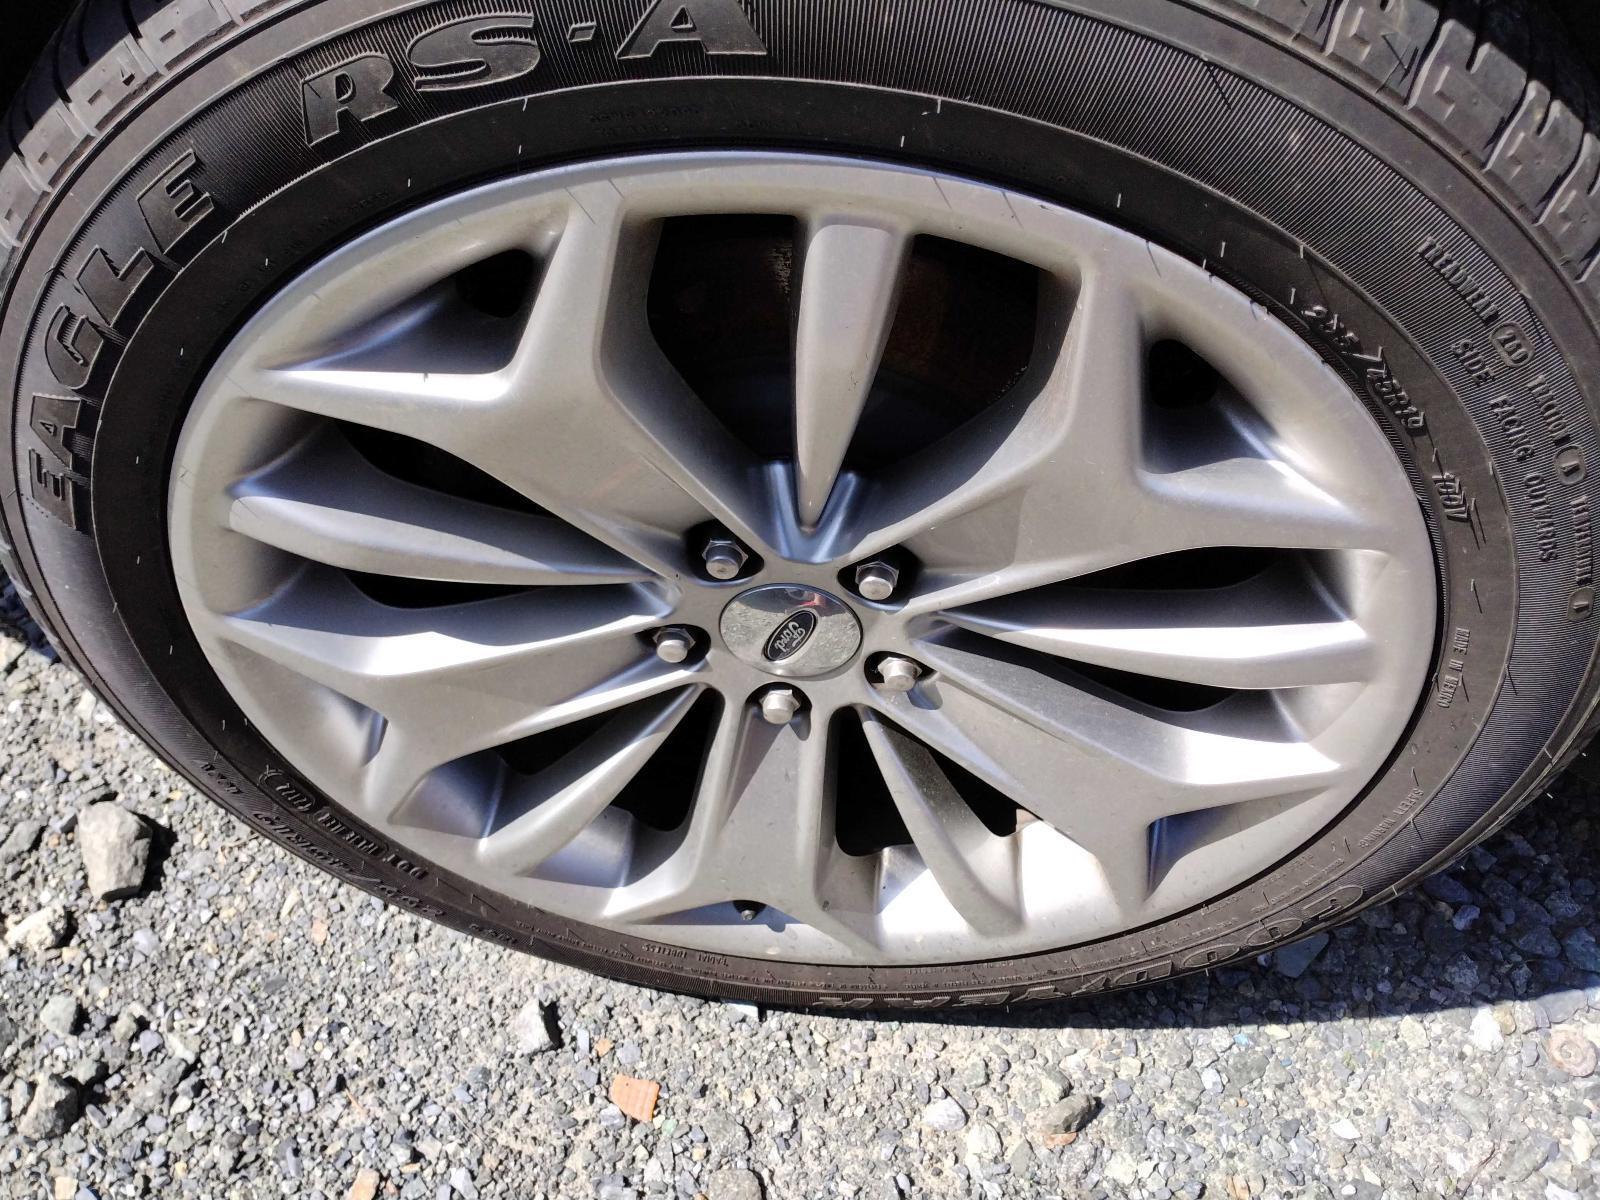 Used Wheel fits: 2013 Ford Taurus 19x8-1/2 aluminum TPMS 10 spoke 5 solid Y and